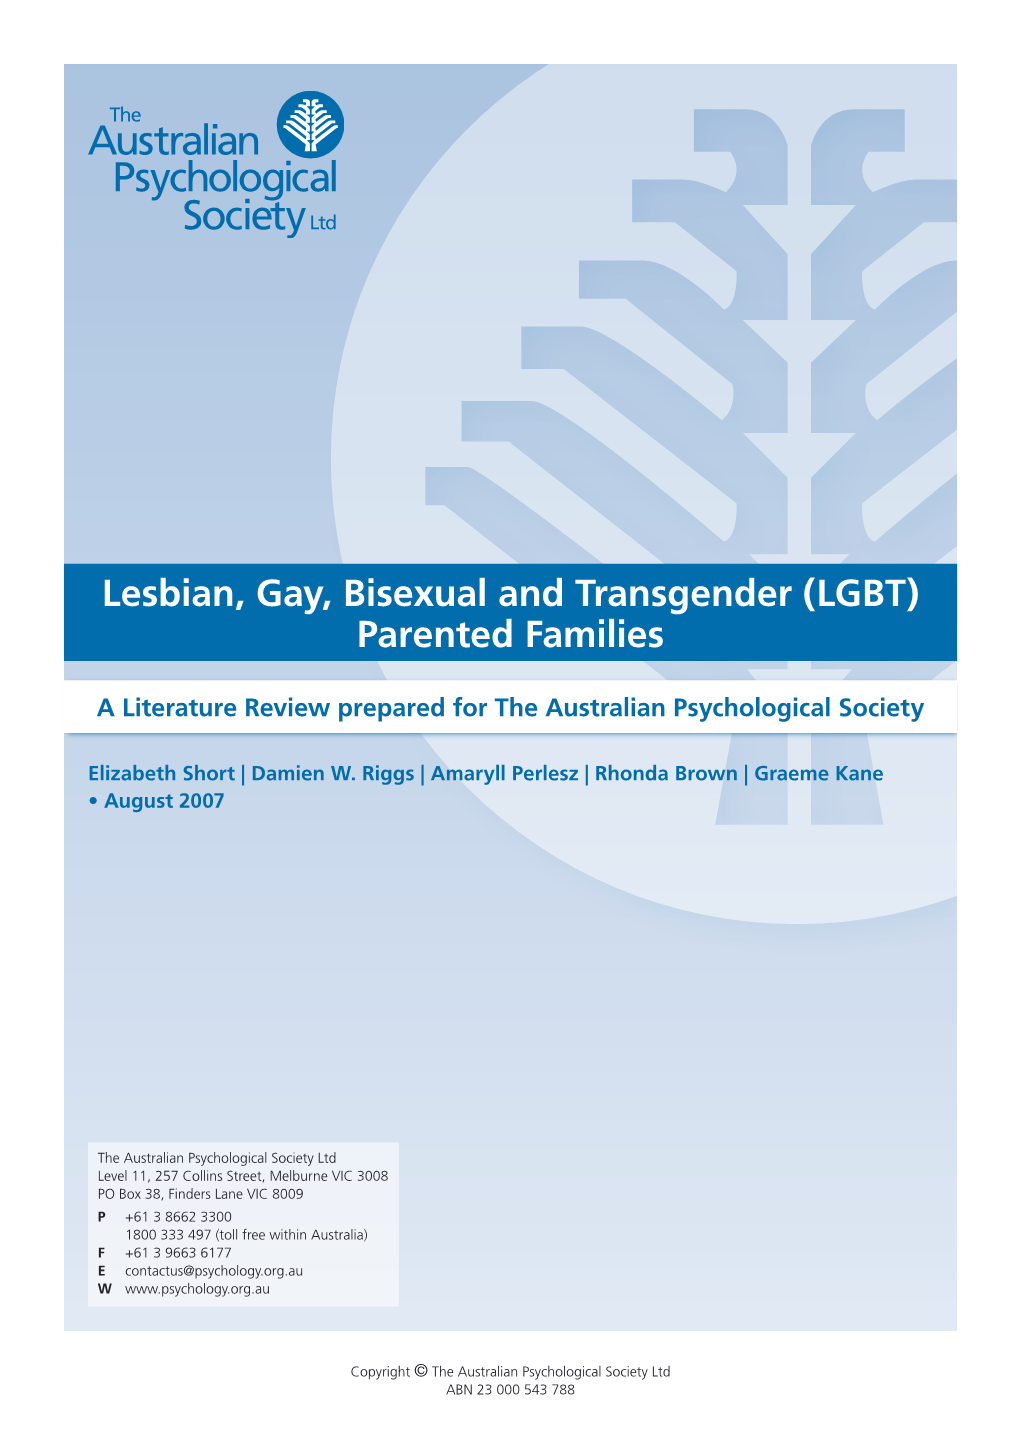 Lesbian, Gay, Bisexual and Transgender (LGBT) Parented Families